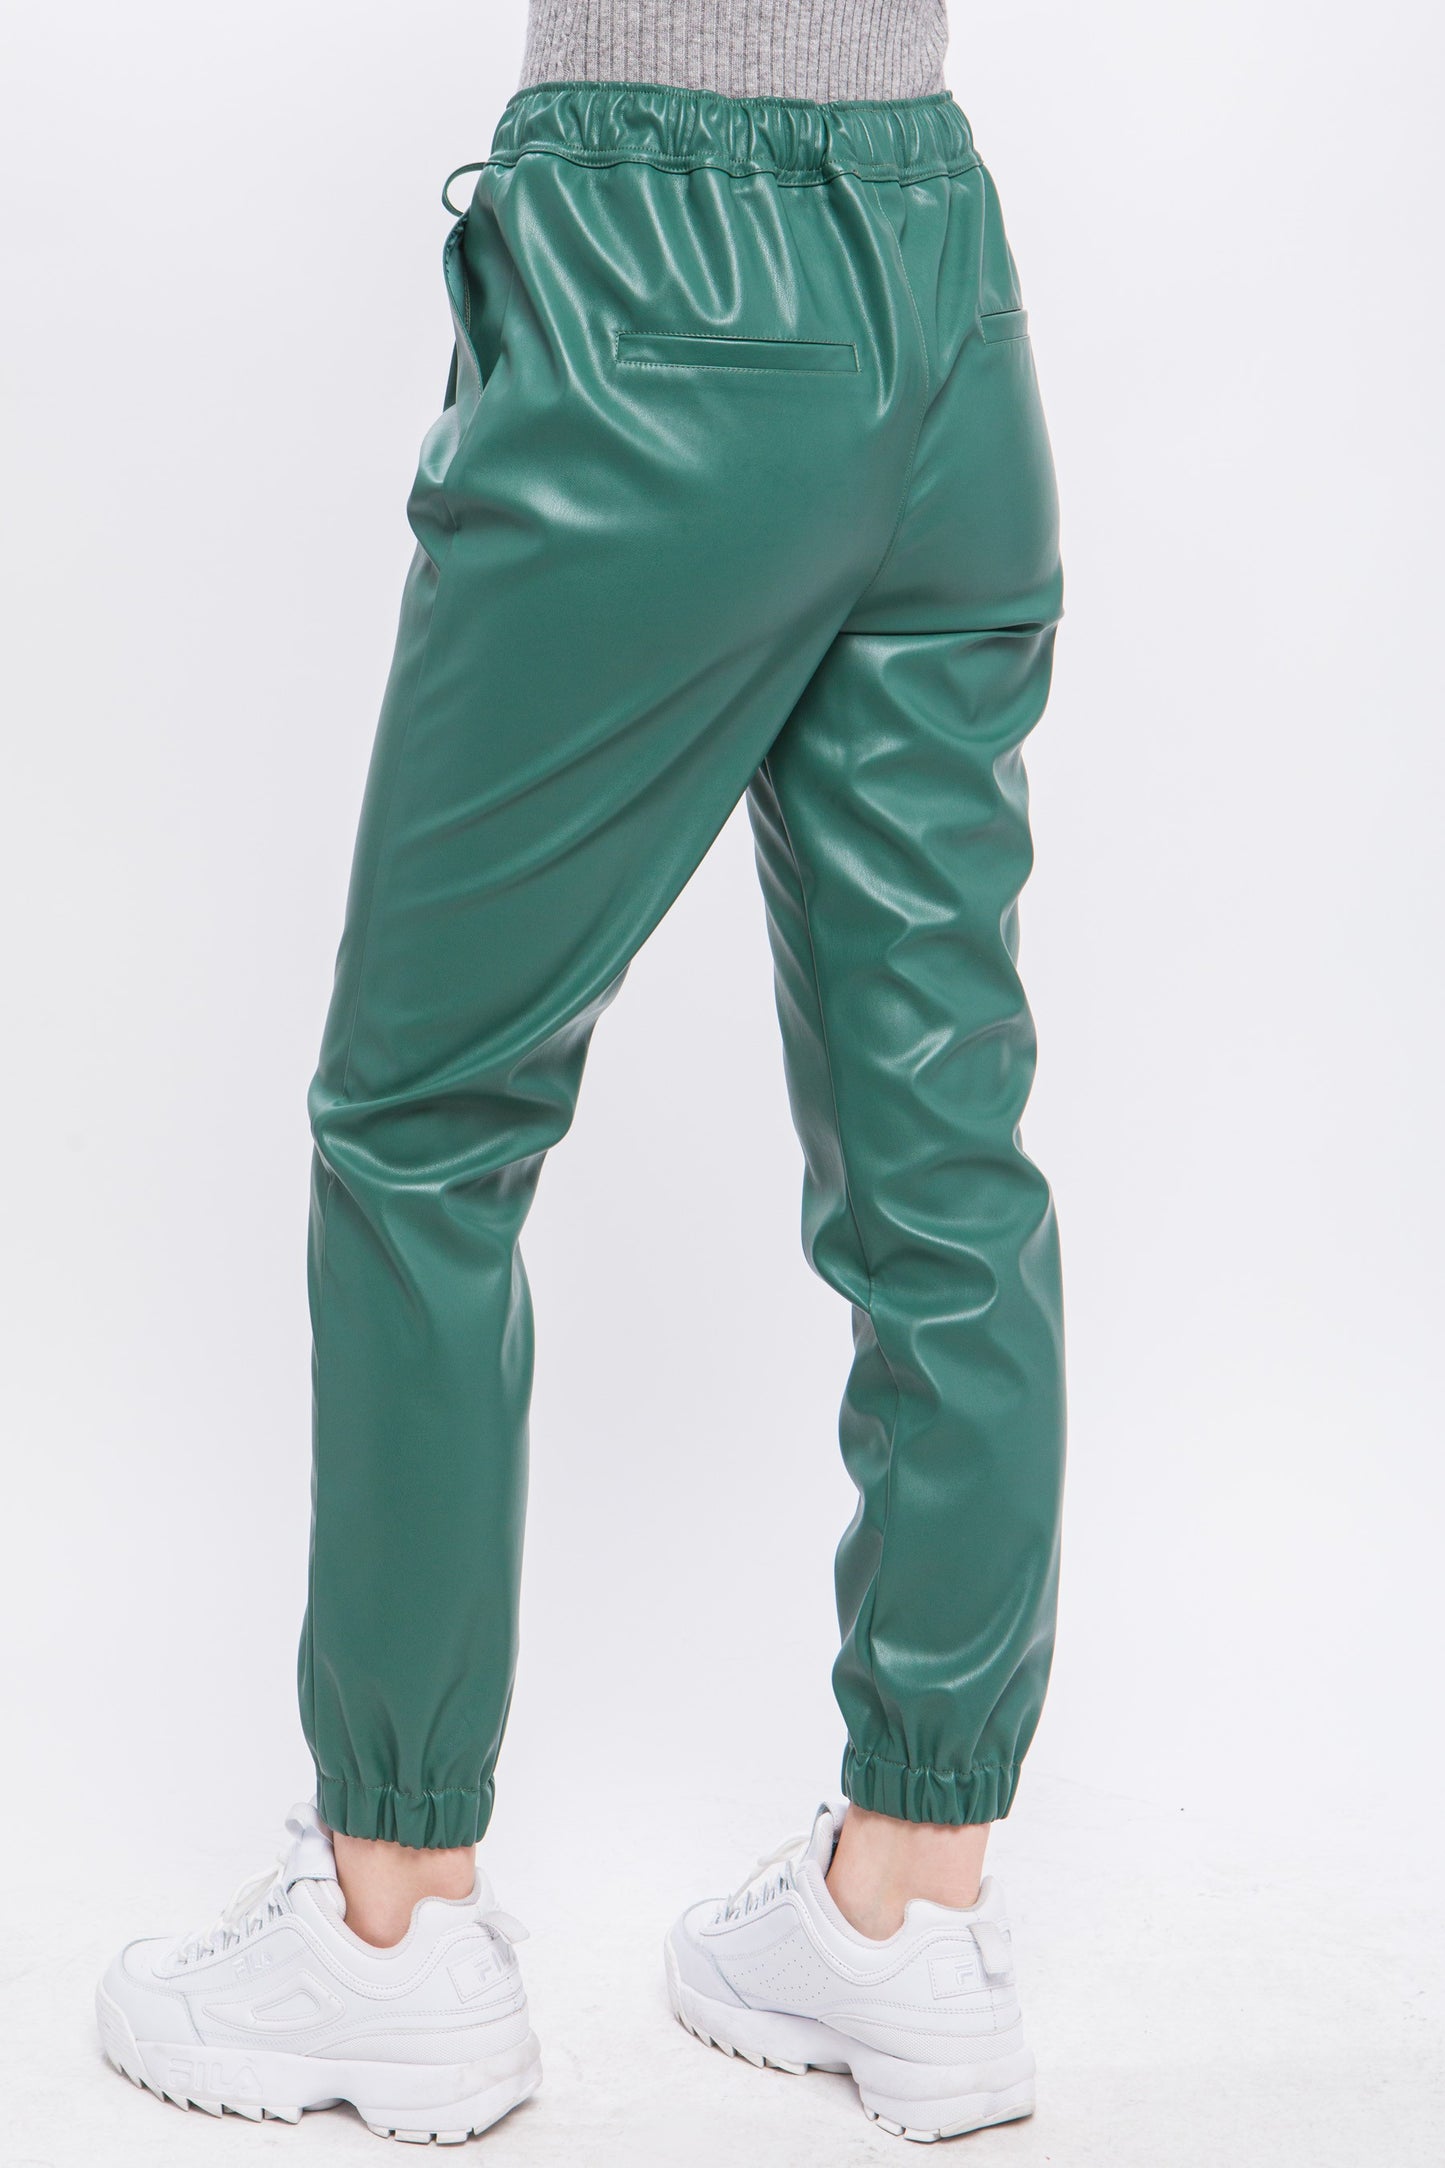 LEATHER JOGGER PANTS - Green Stone